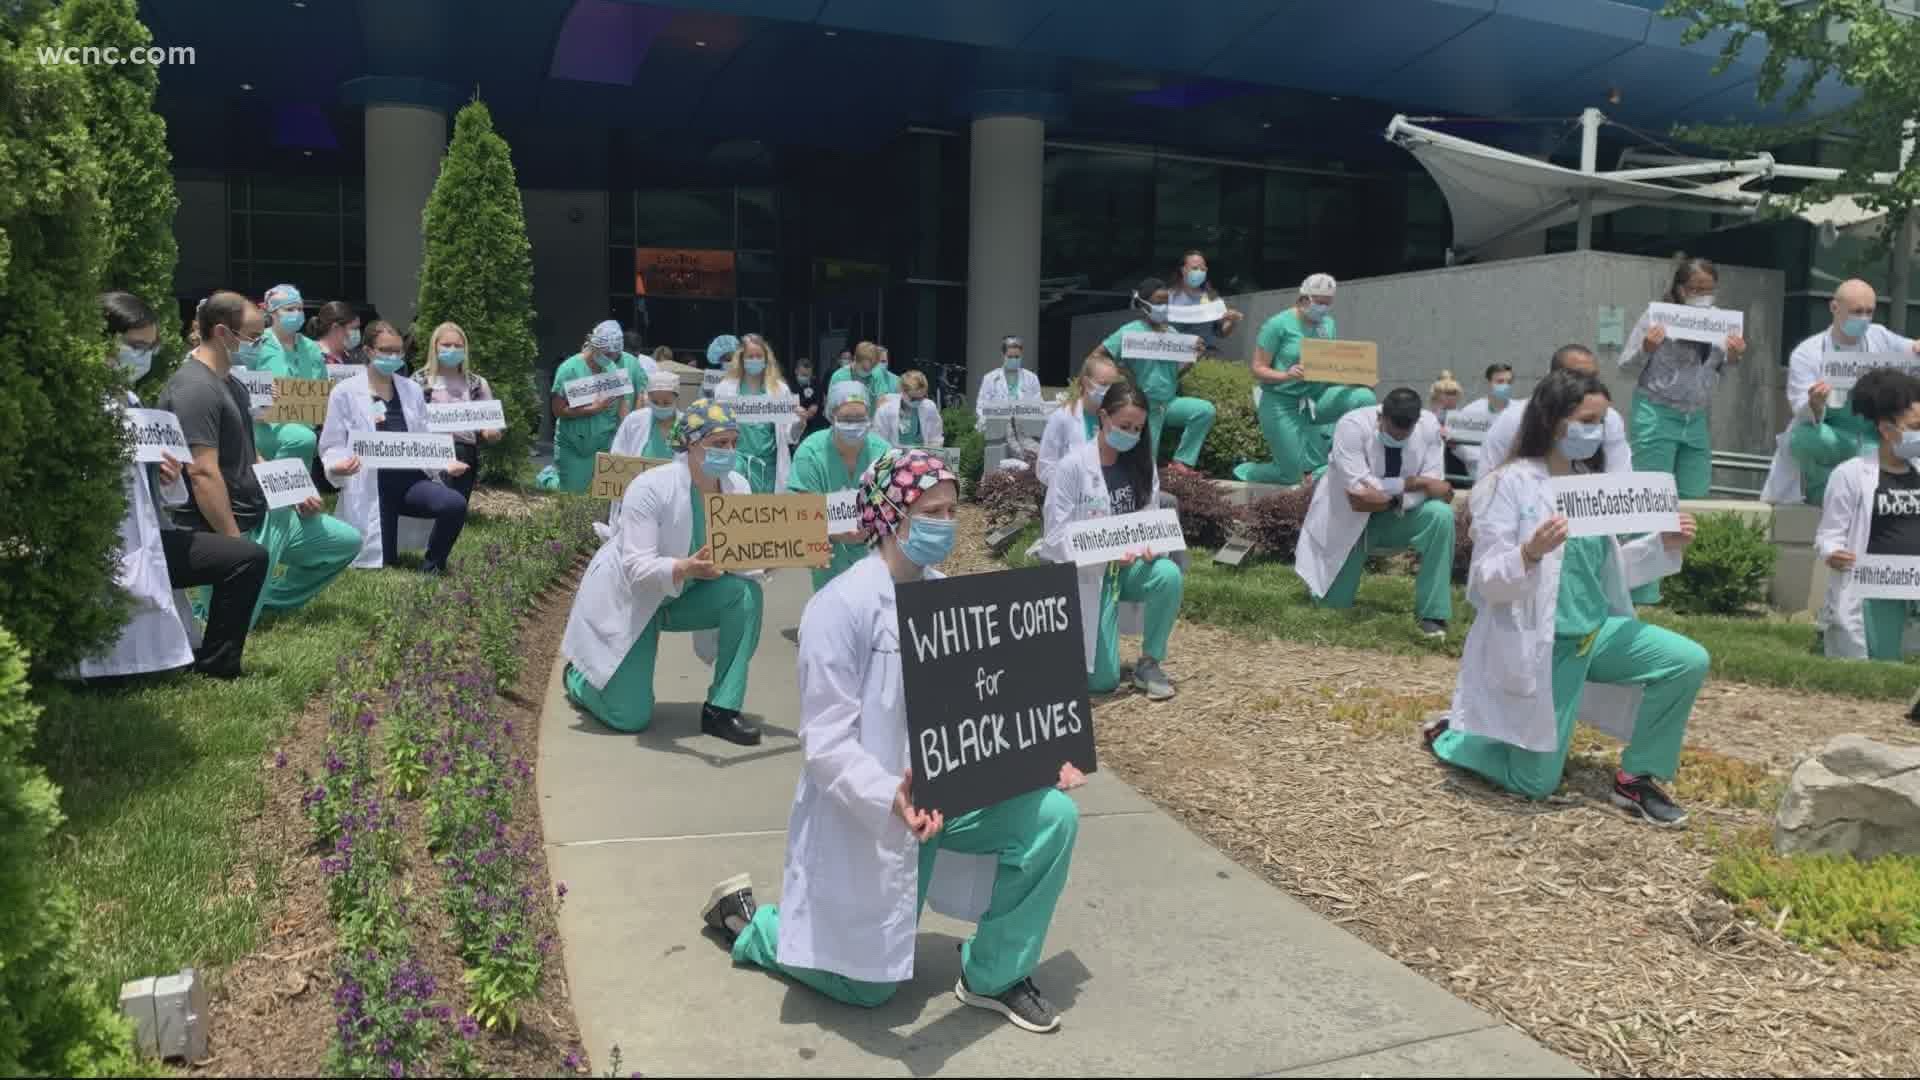 Doctors, nurses and staff took a knee for a moment of silence as a way to honor George Floyd and speak out against racial injustice.